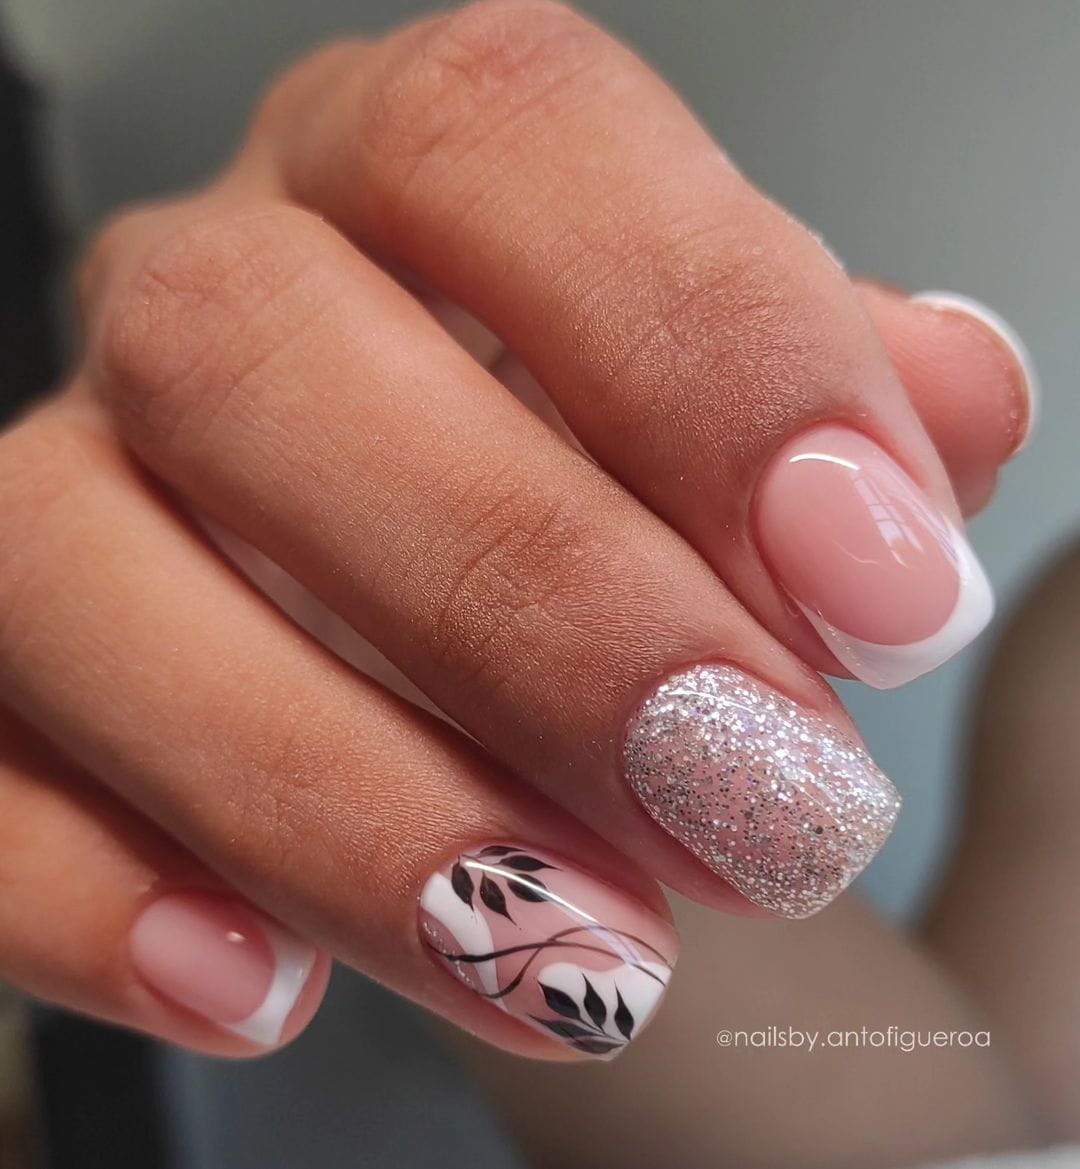 100 Of The Best Spring Inspired Nail Designs images 58